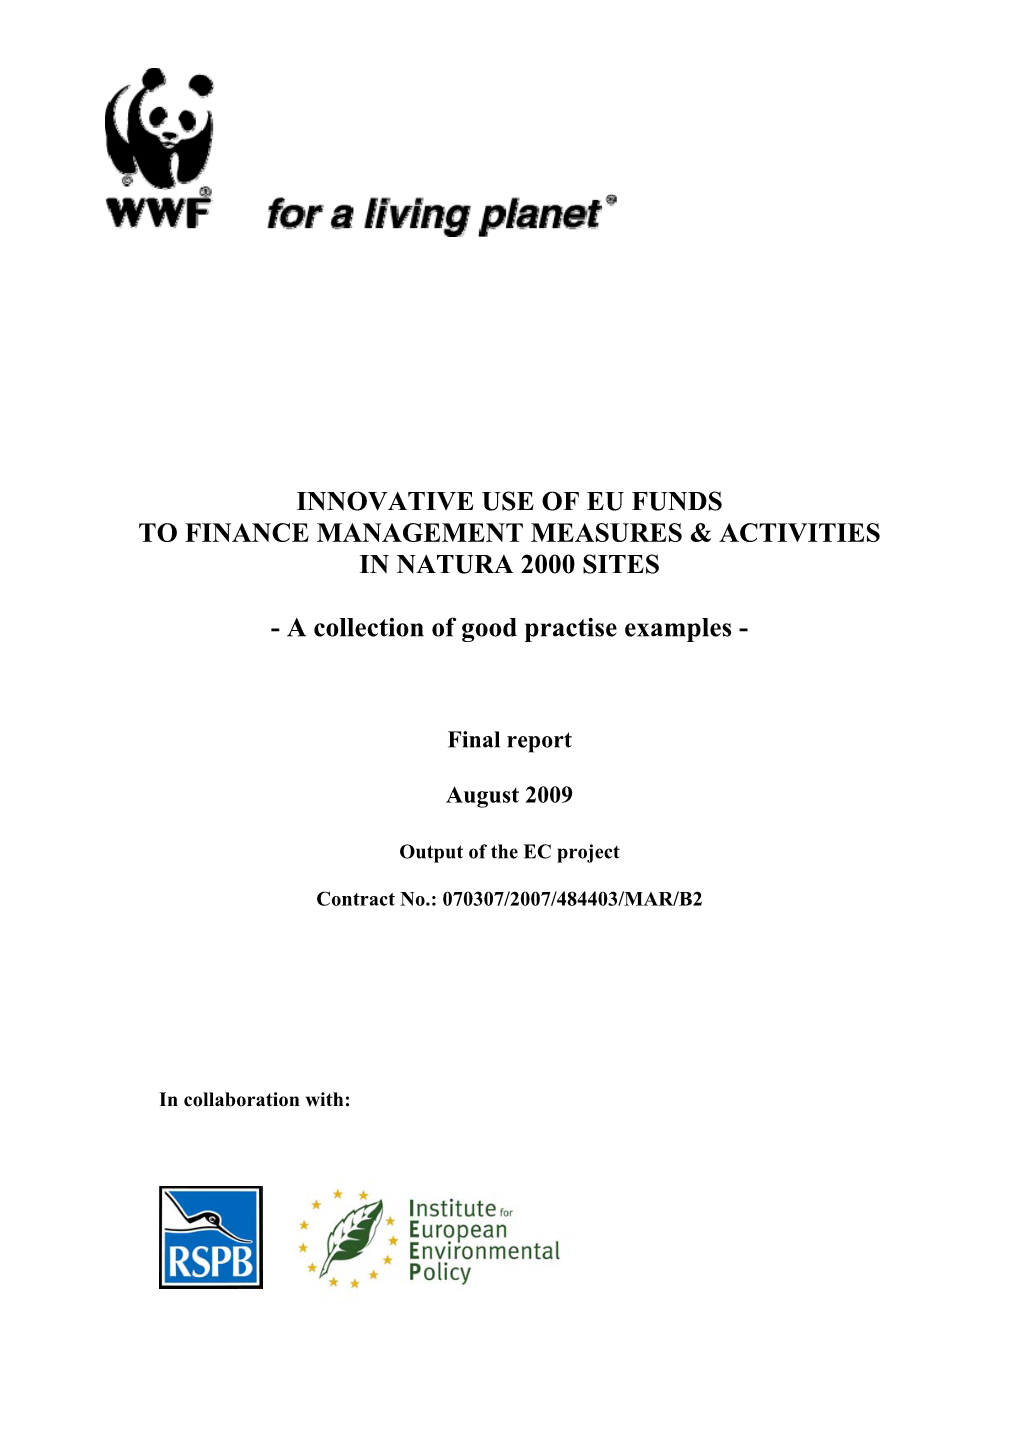 Innovative Use of Eu Funds to Finance Management Measures & Activities in Natura 2000 Sites